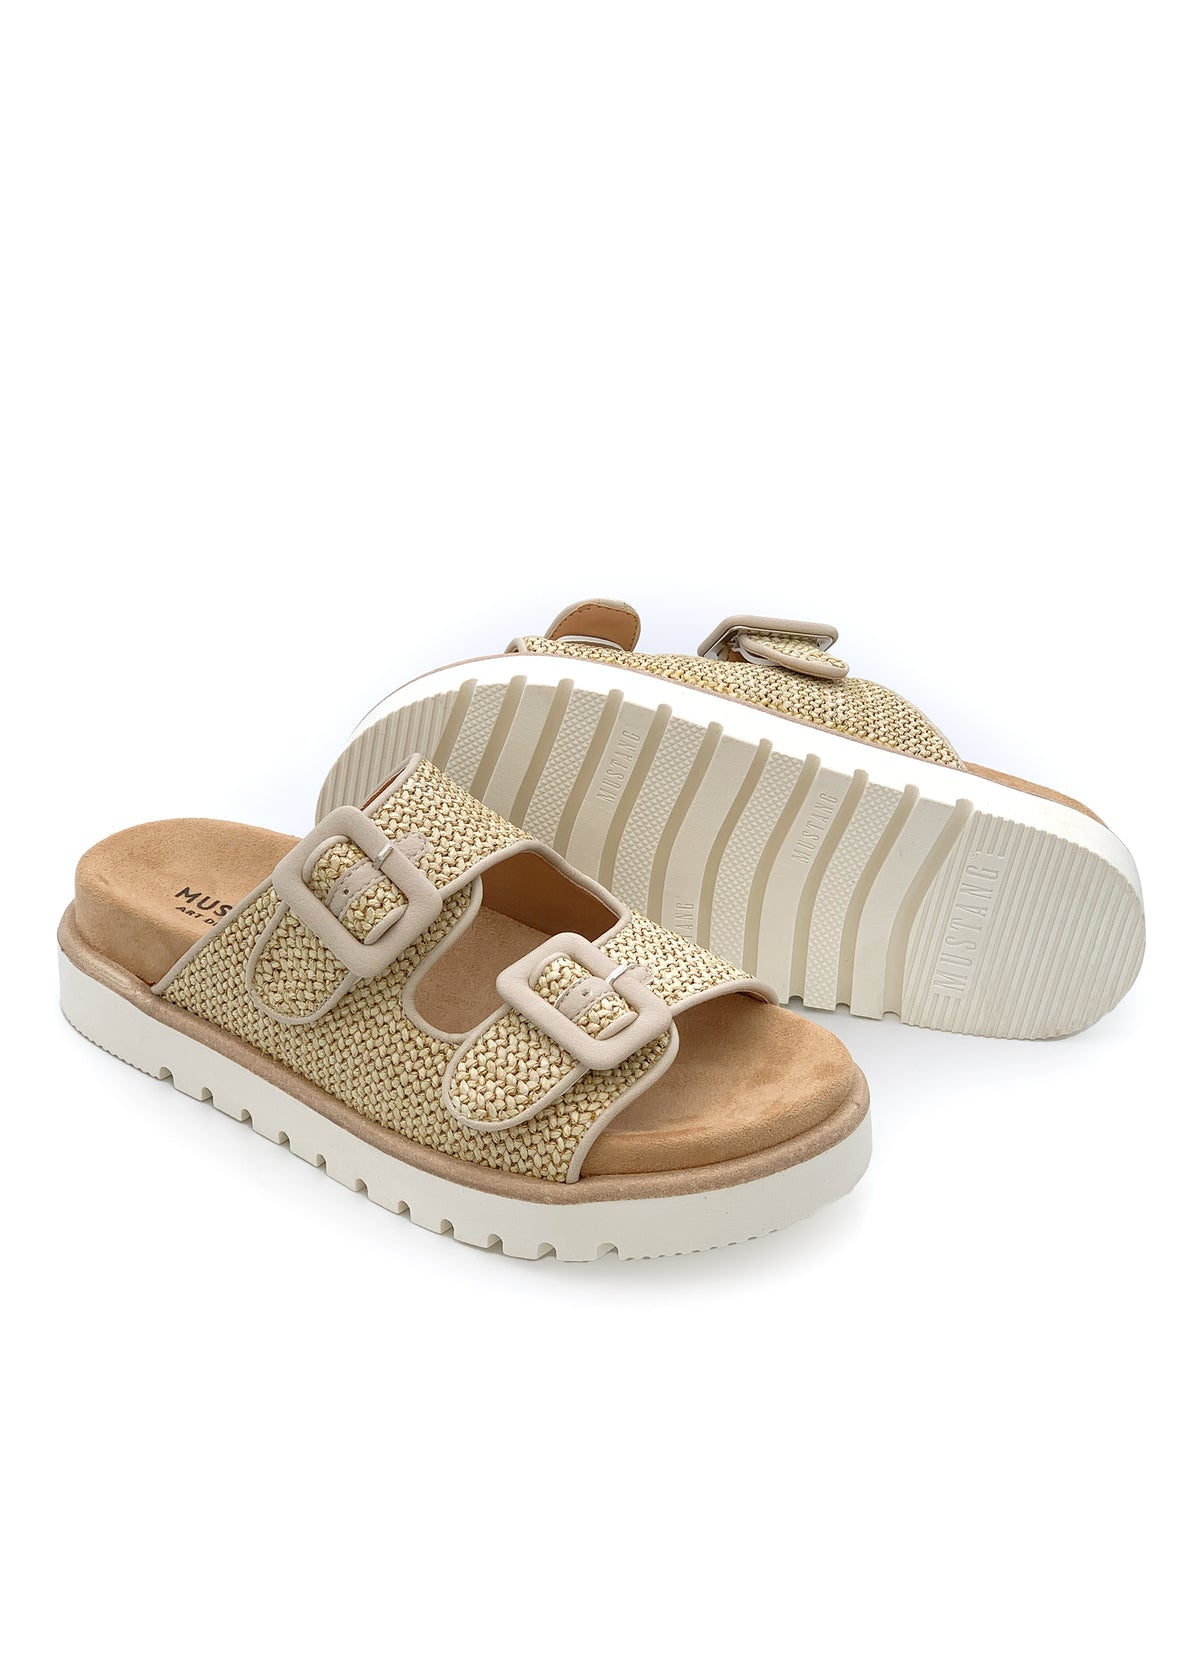 Stiletto sandals with a thicker sole - beige knitted surface